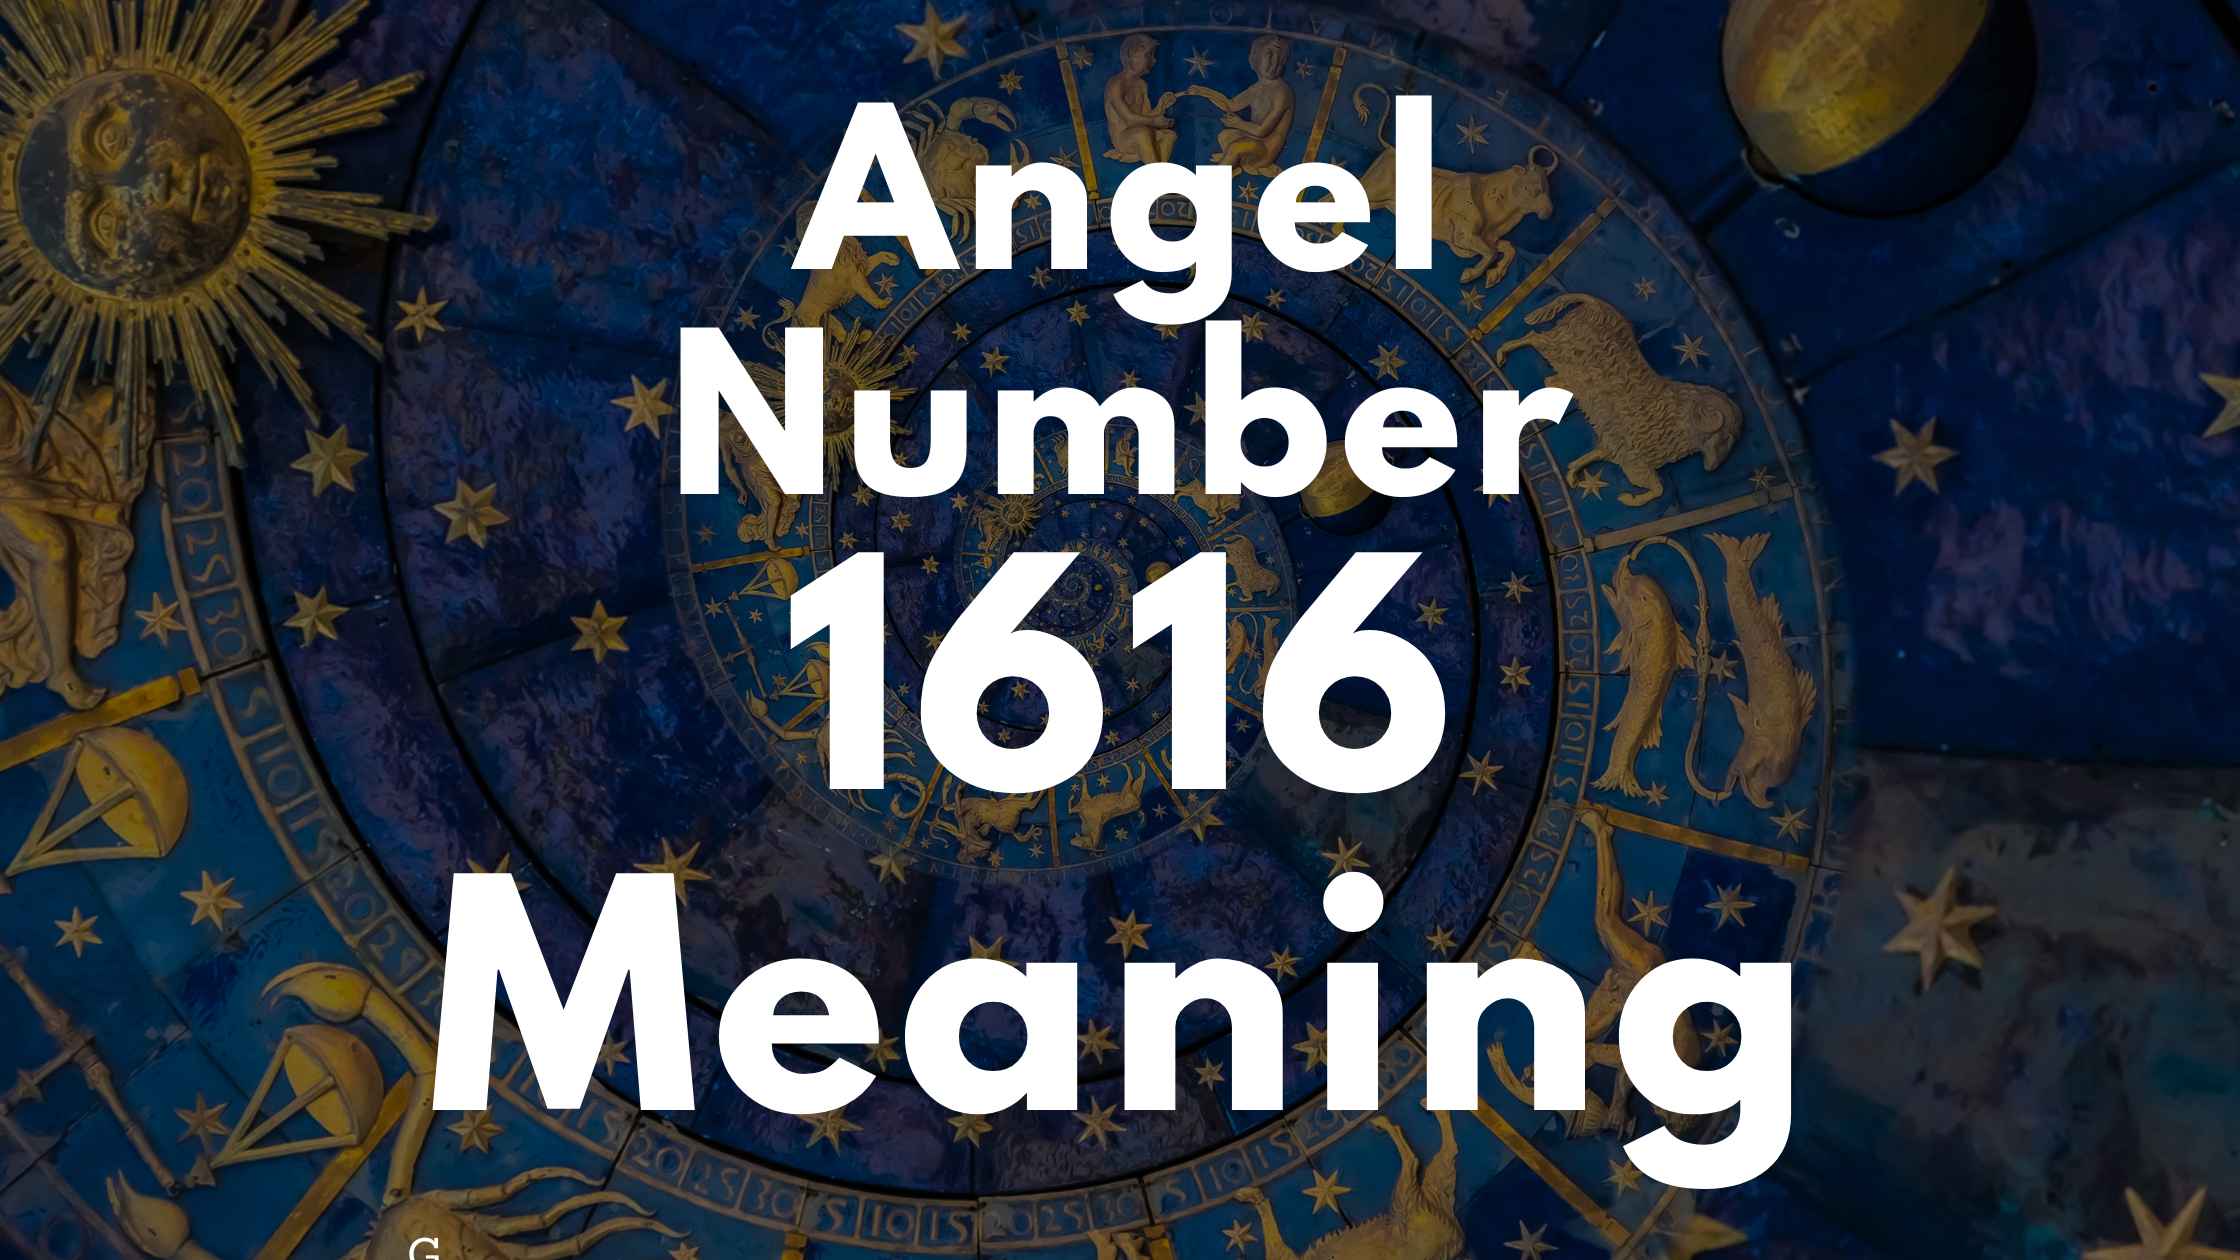 Angel Number 1616 Spiritual Meaning, Symbolism, and Significance